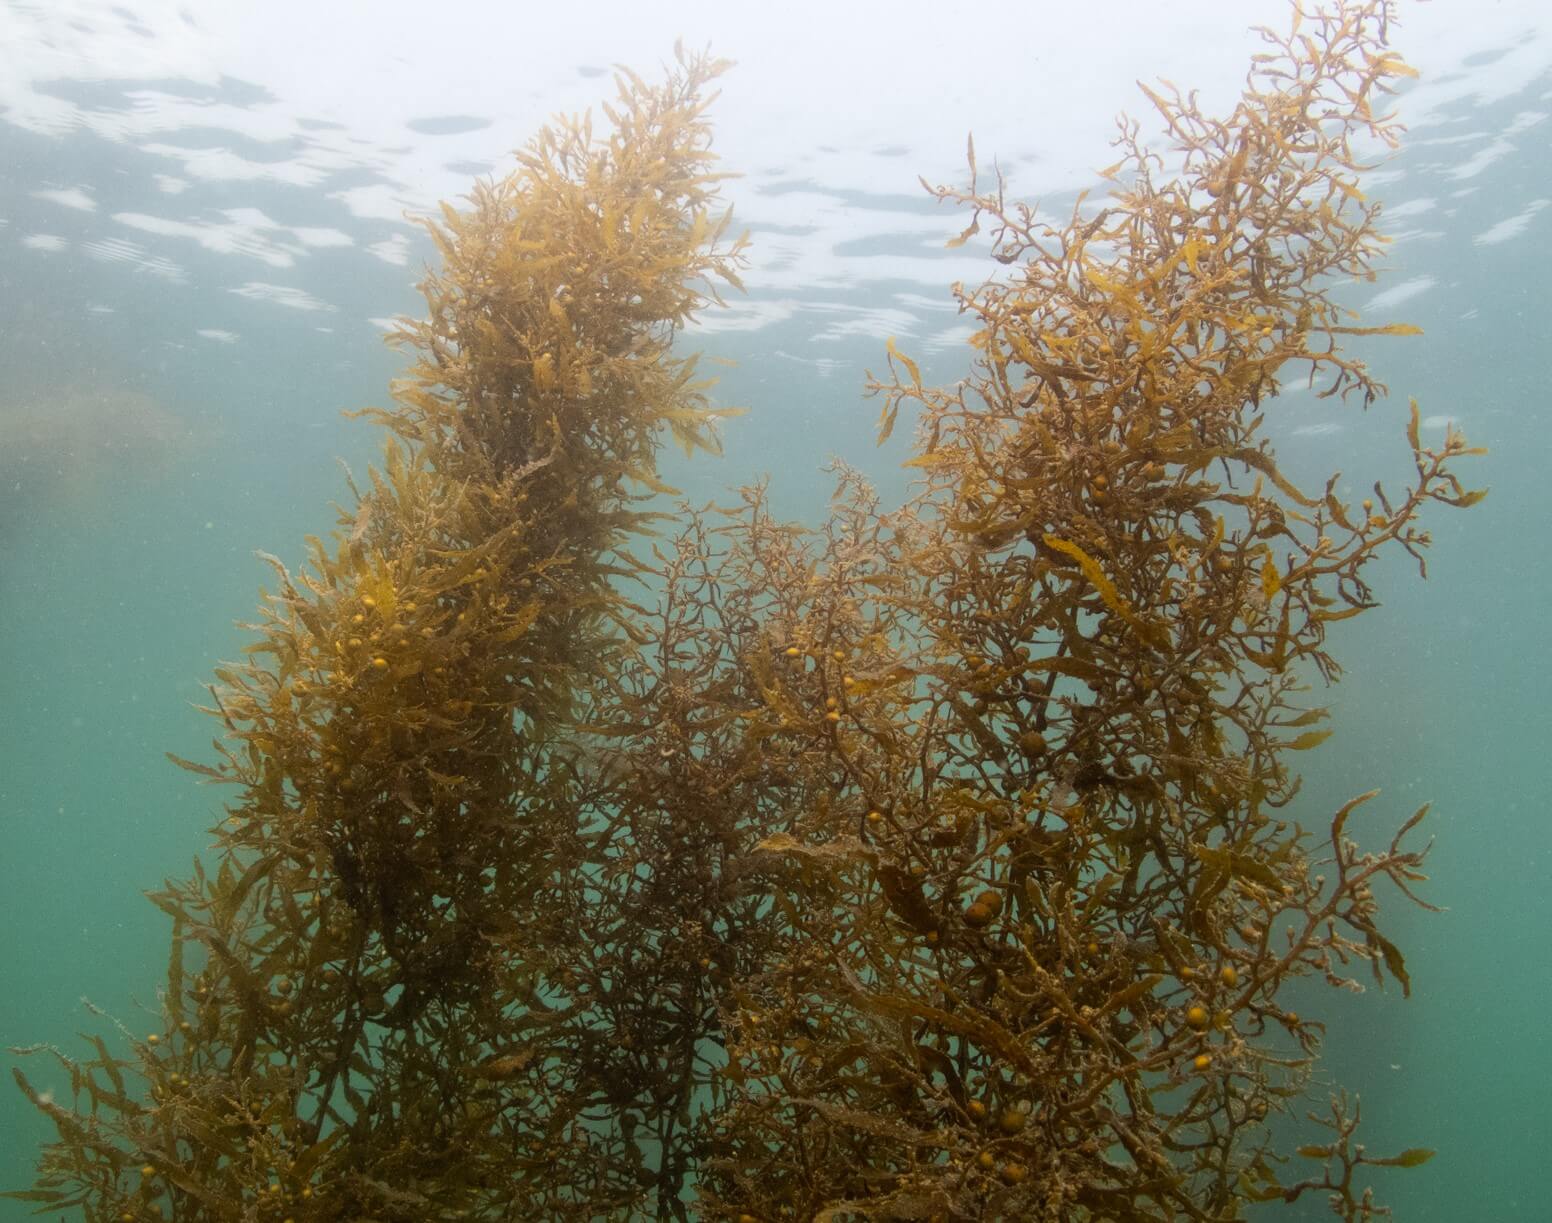 Croucher Ecology | Sargassum may grow into forests beneath the waves